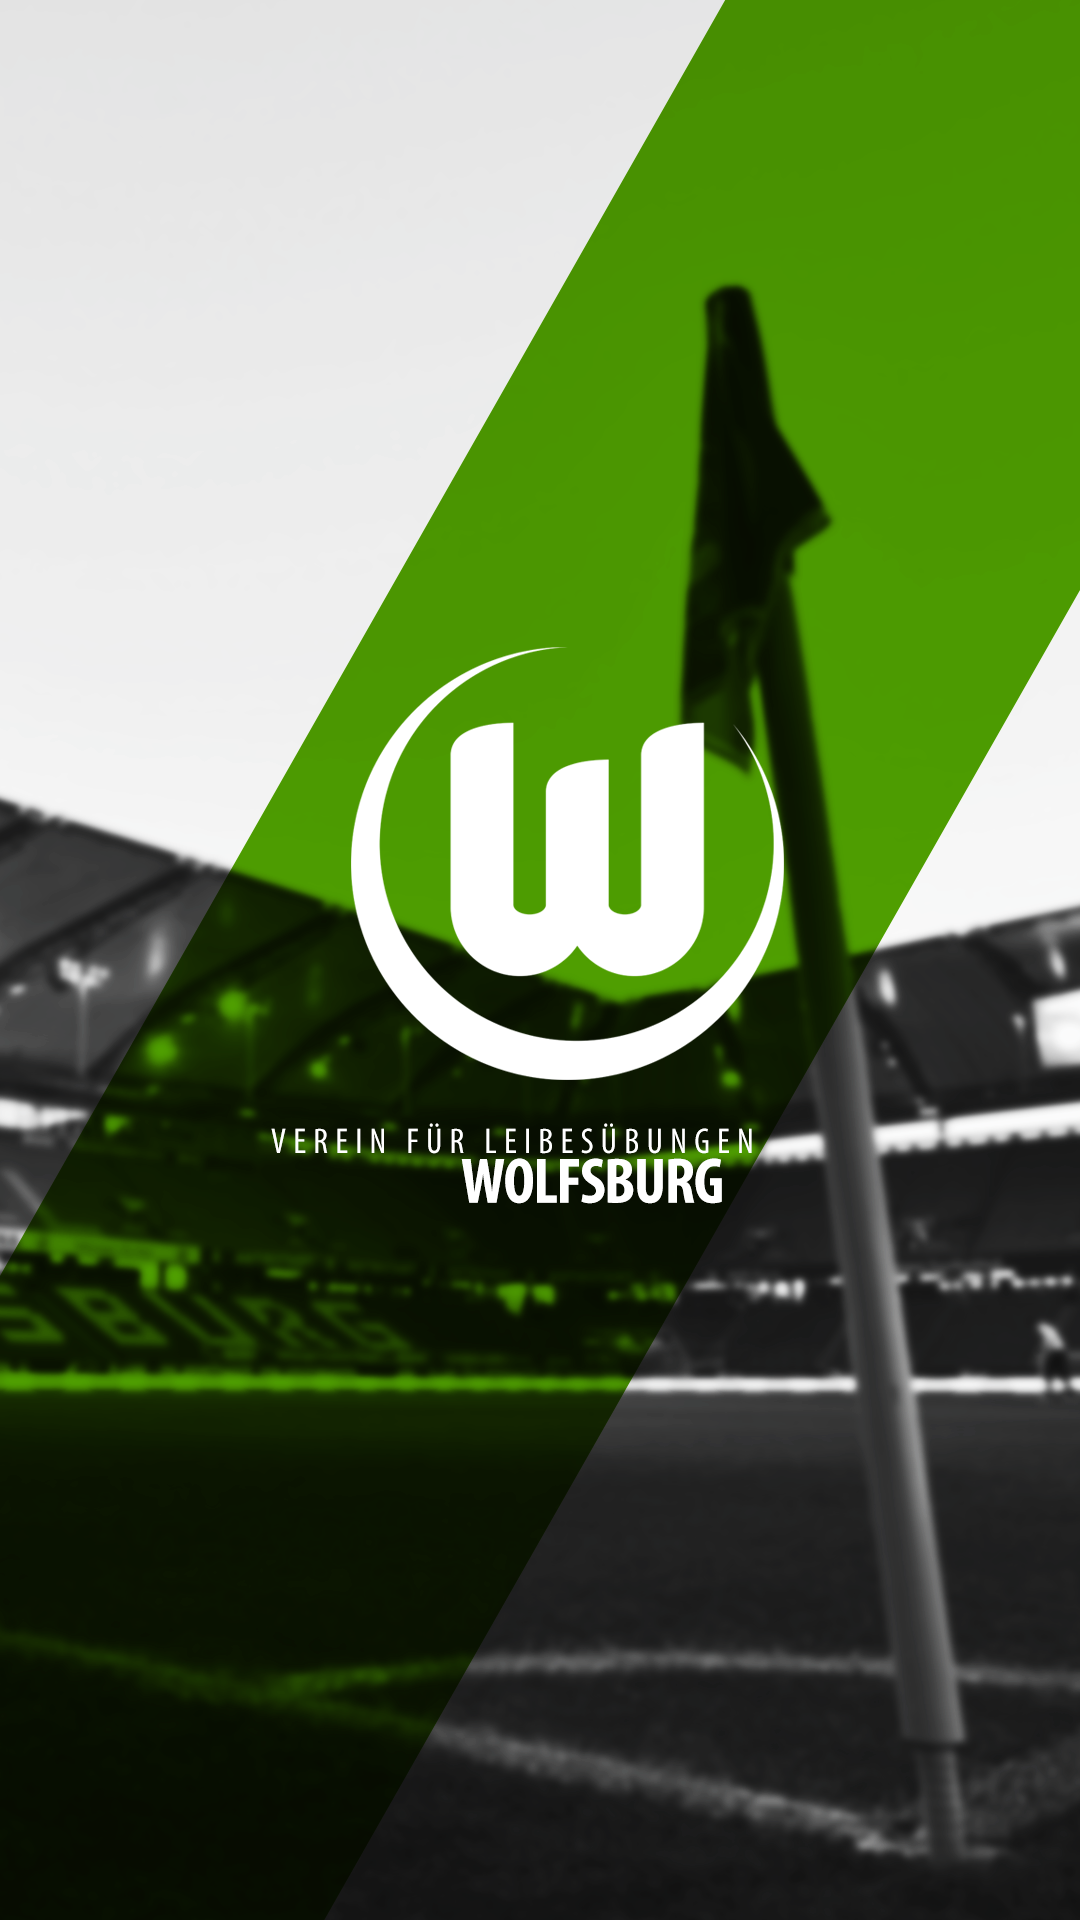 Mobile Vfl Wolfsburg Wallpaper Full HD Pictures